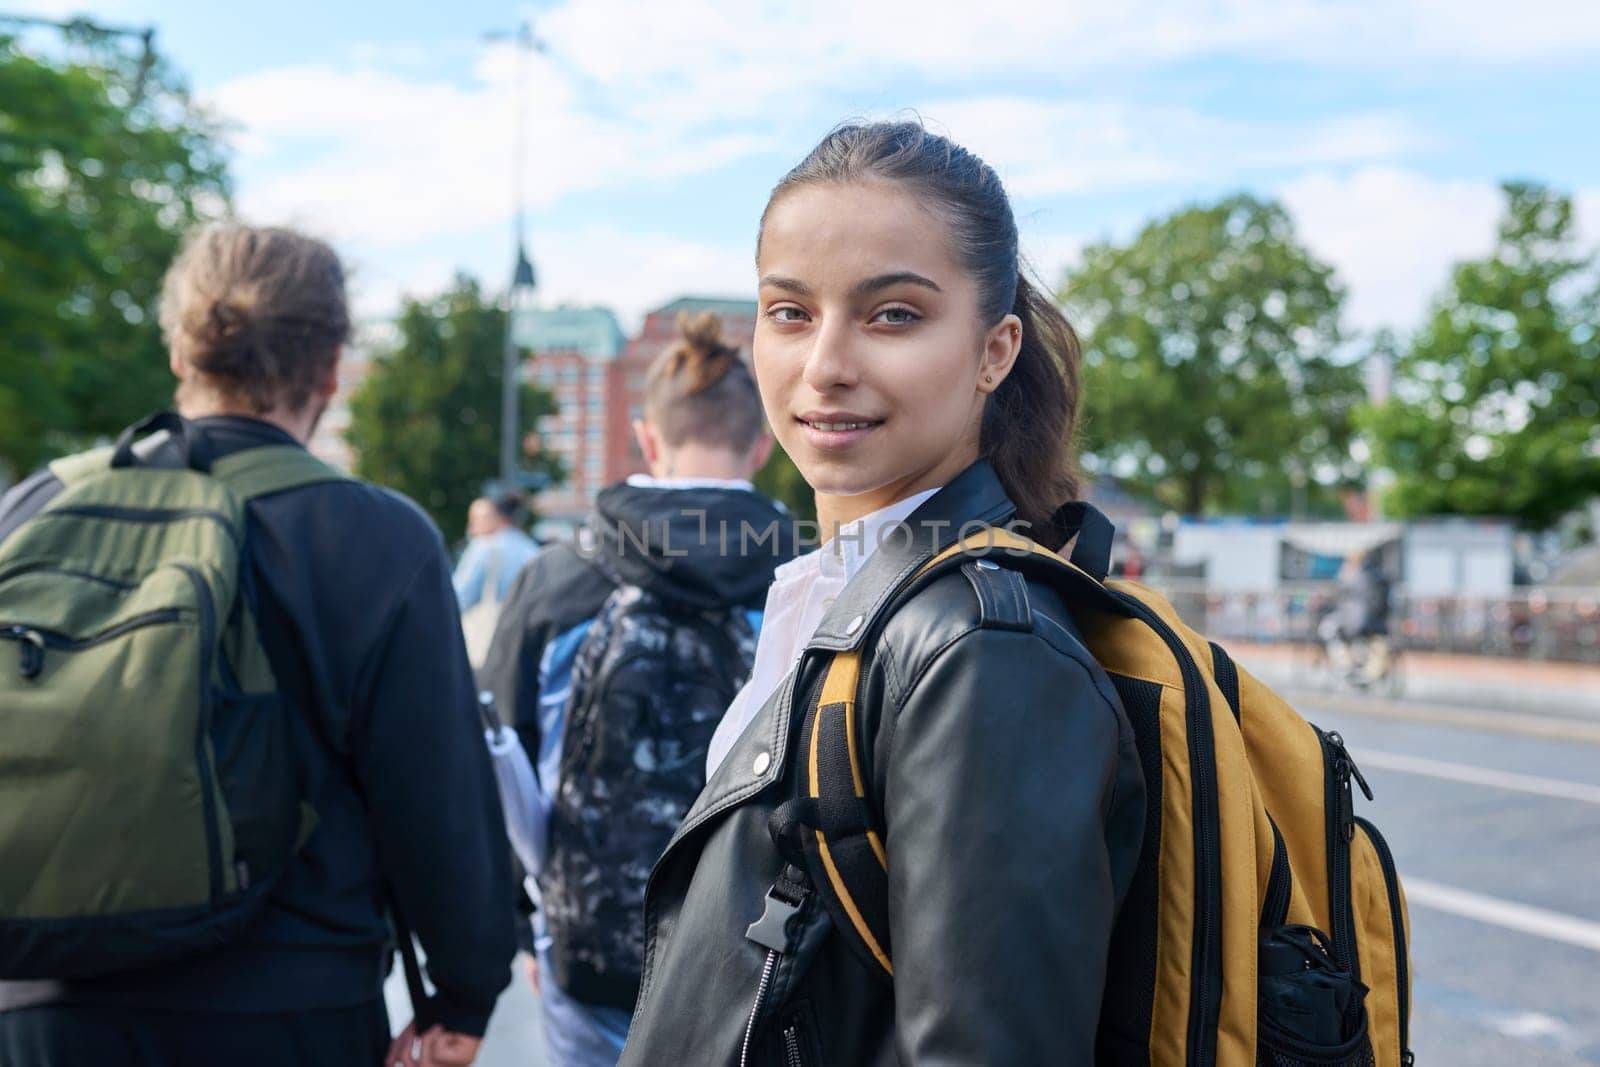 Portrait of teenage high school student, smiling confident girl 16, 17 years old with backpack looking at camera outdoor, on street of modern city. Urban life, adolescence, education, youth concept